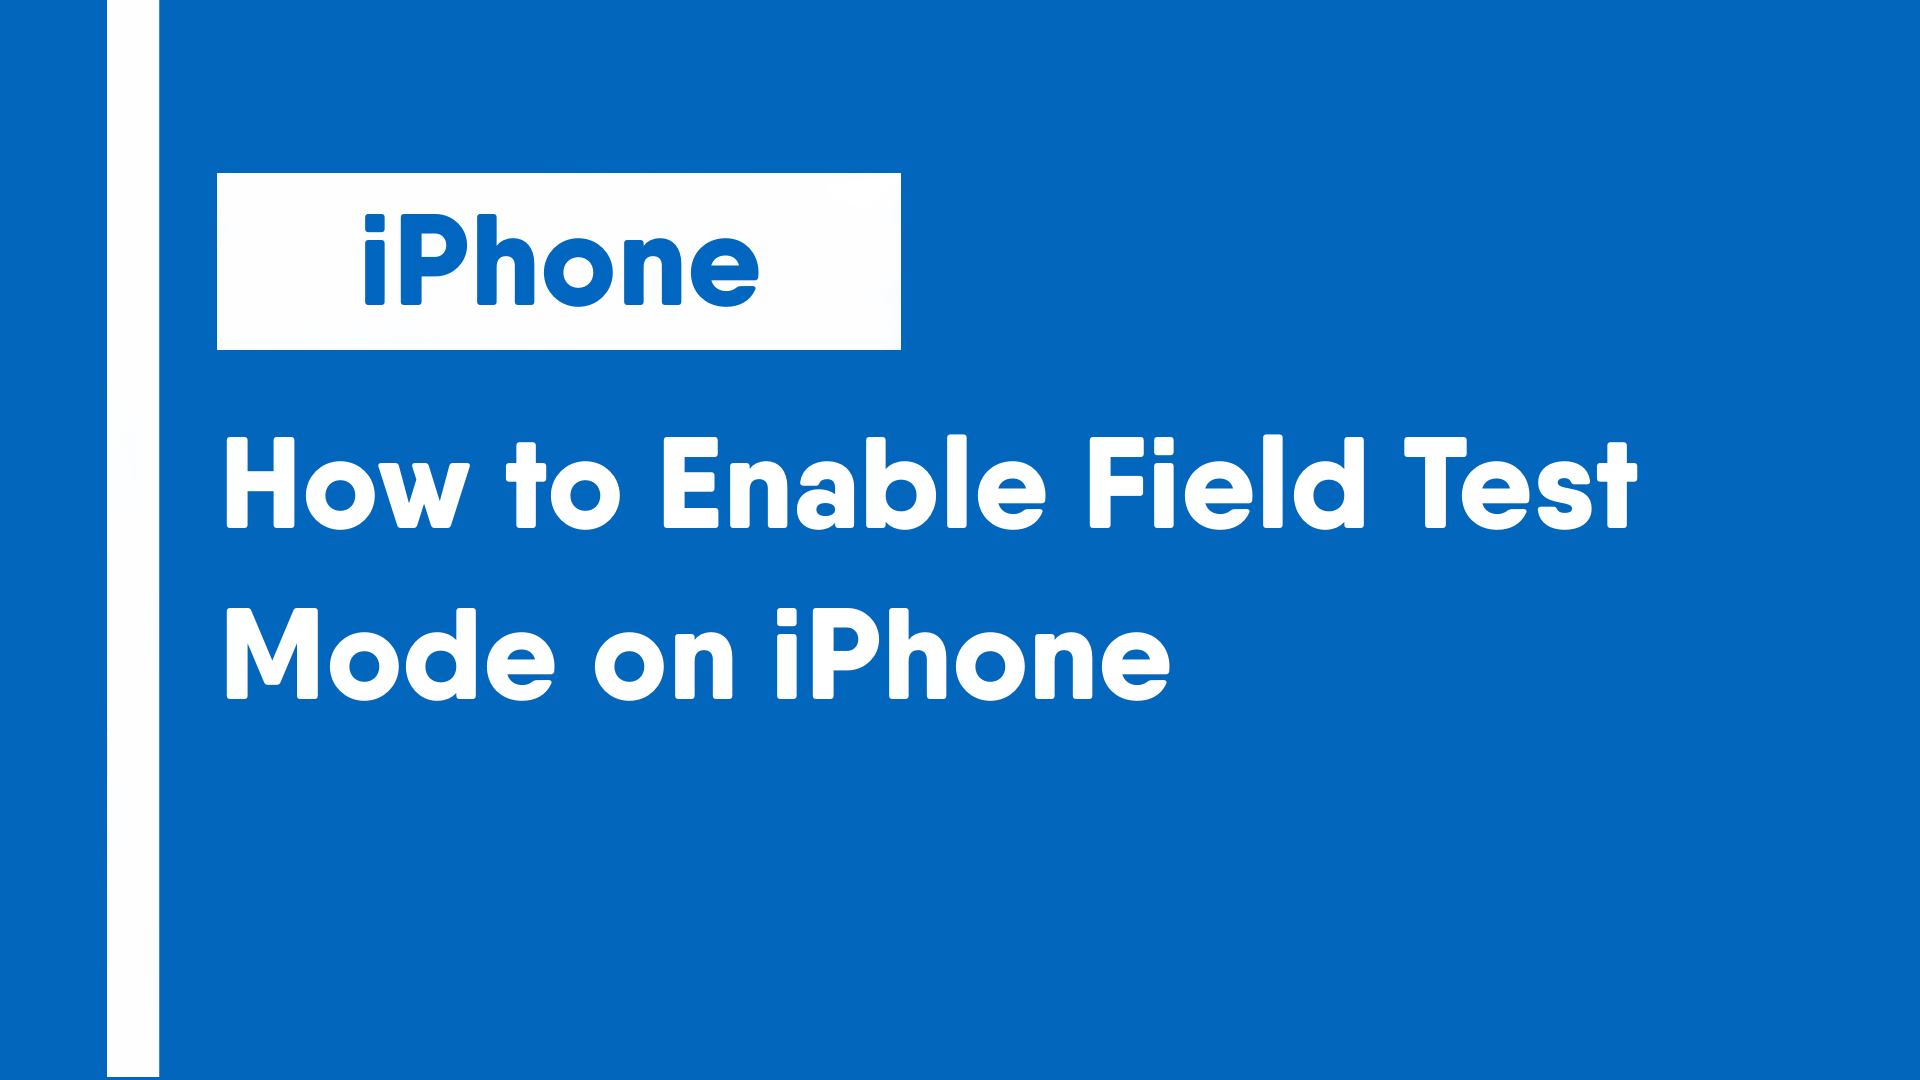 How to Enable Field Test Mode on iPhone